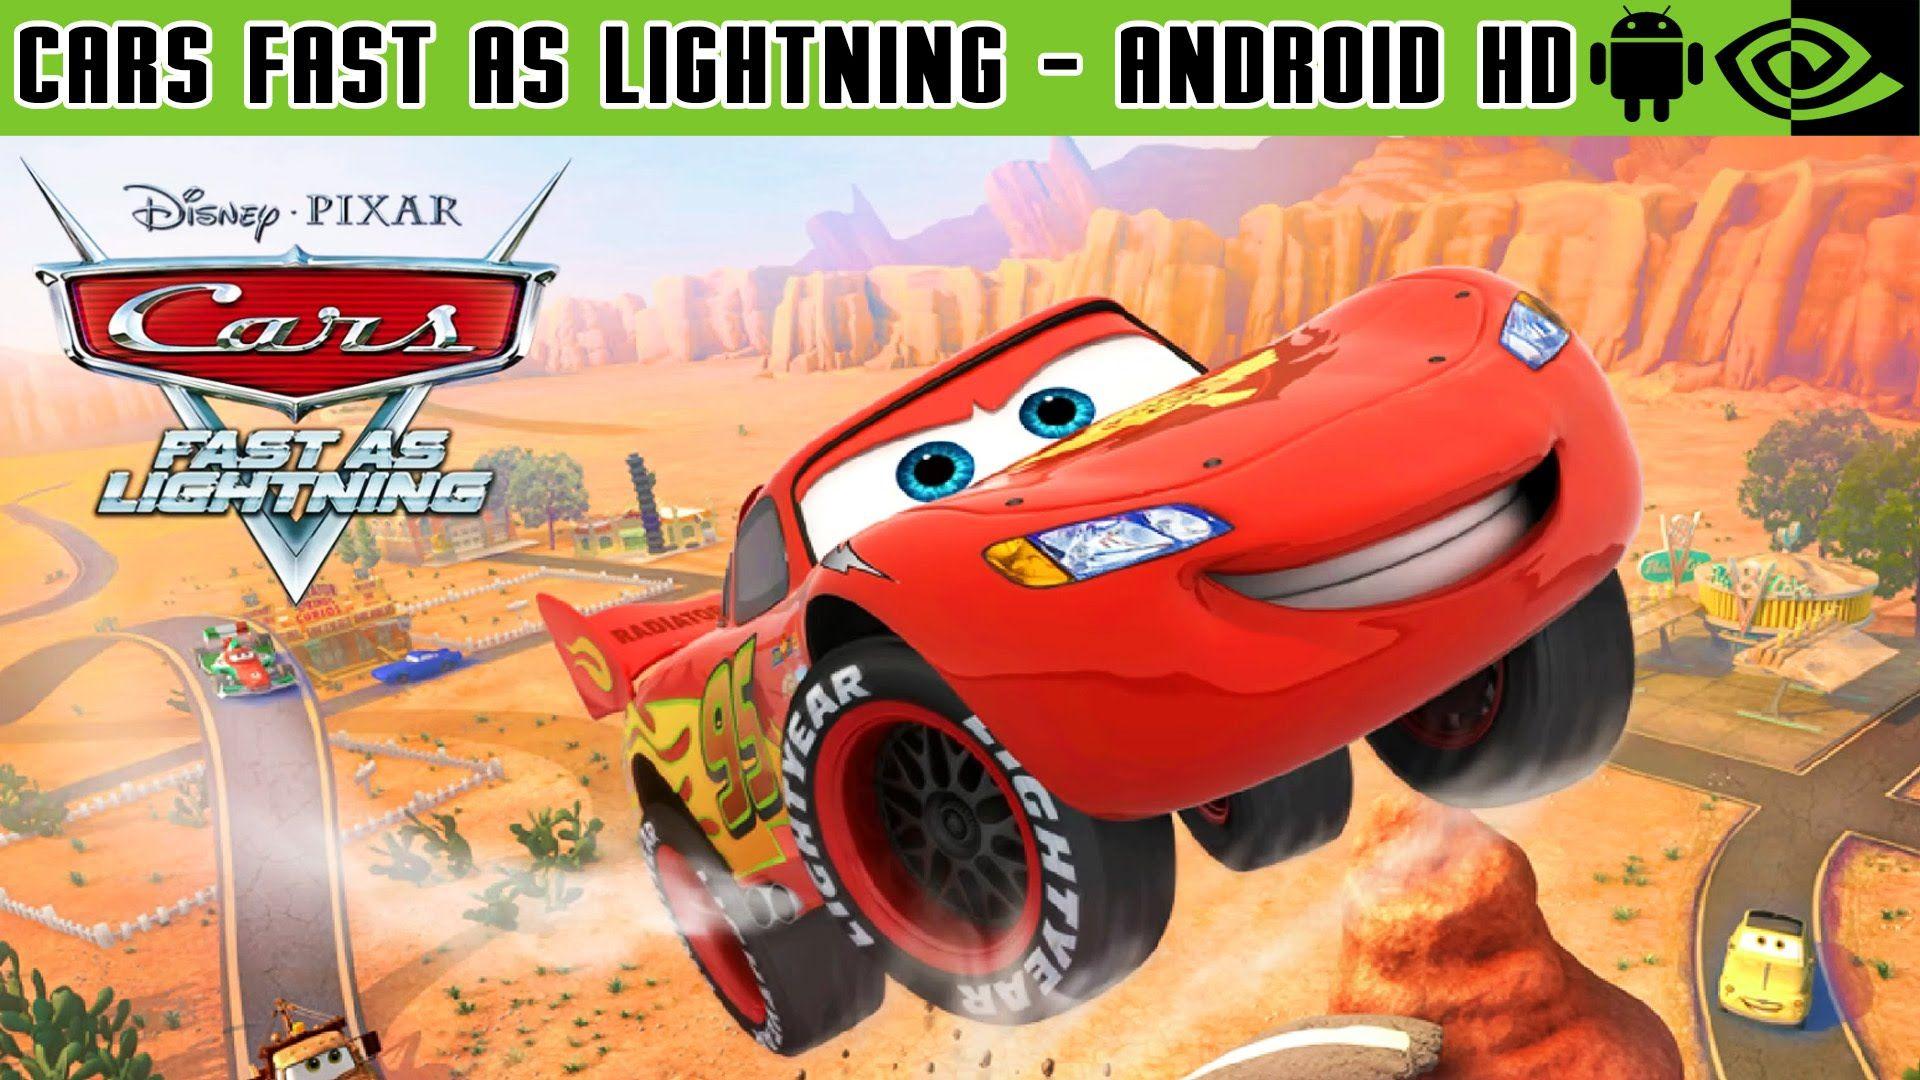 Cars: Fast as Lightning Nvidia Shield Tablet Android